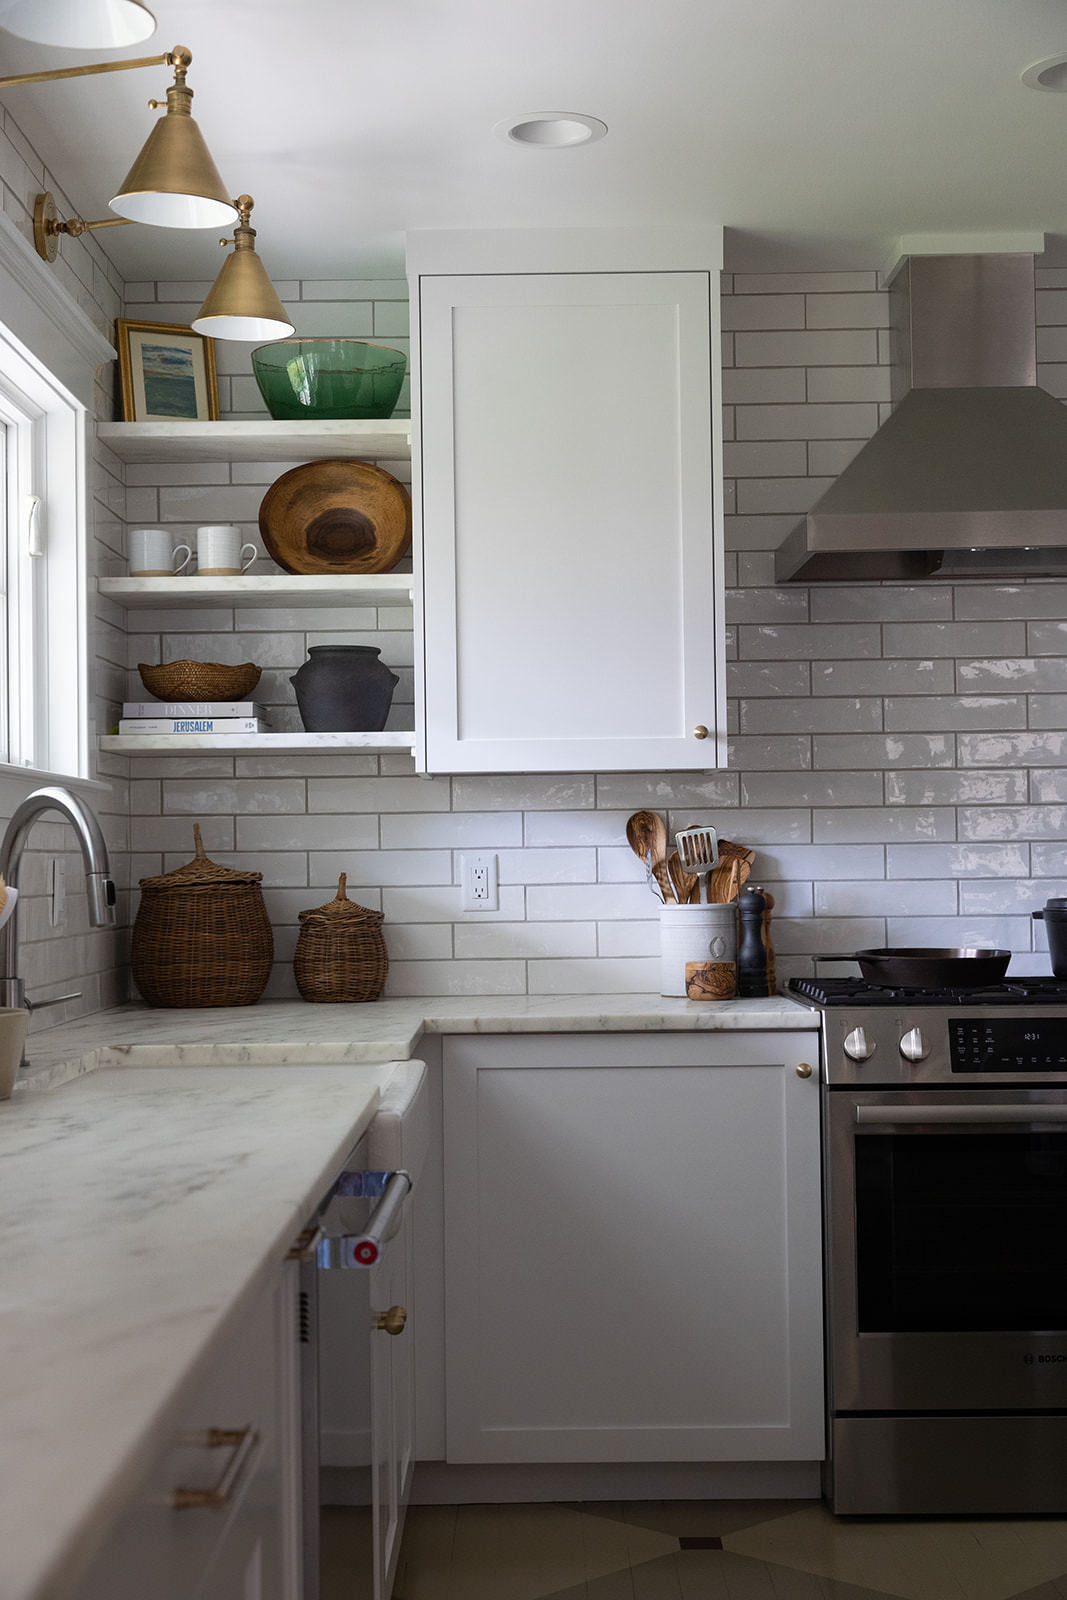 White kitchen with corner shelves and wicker baskets and wood bowls